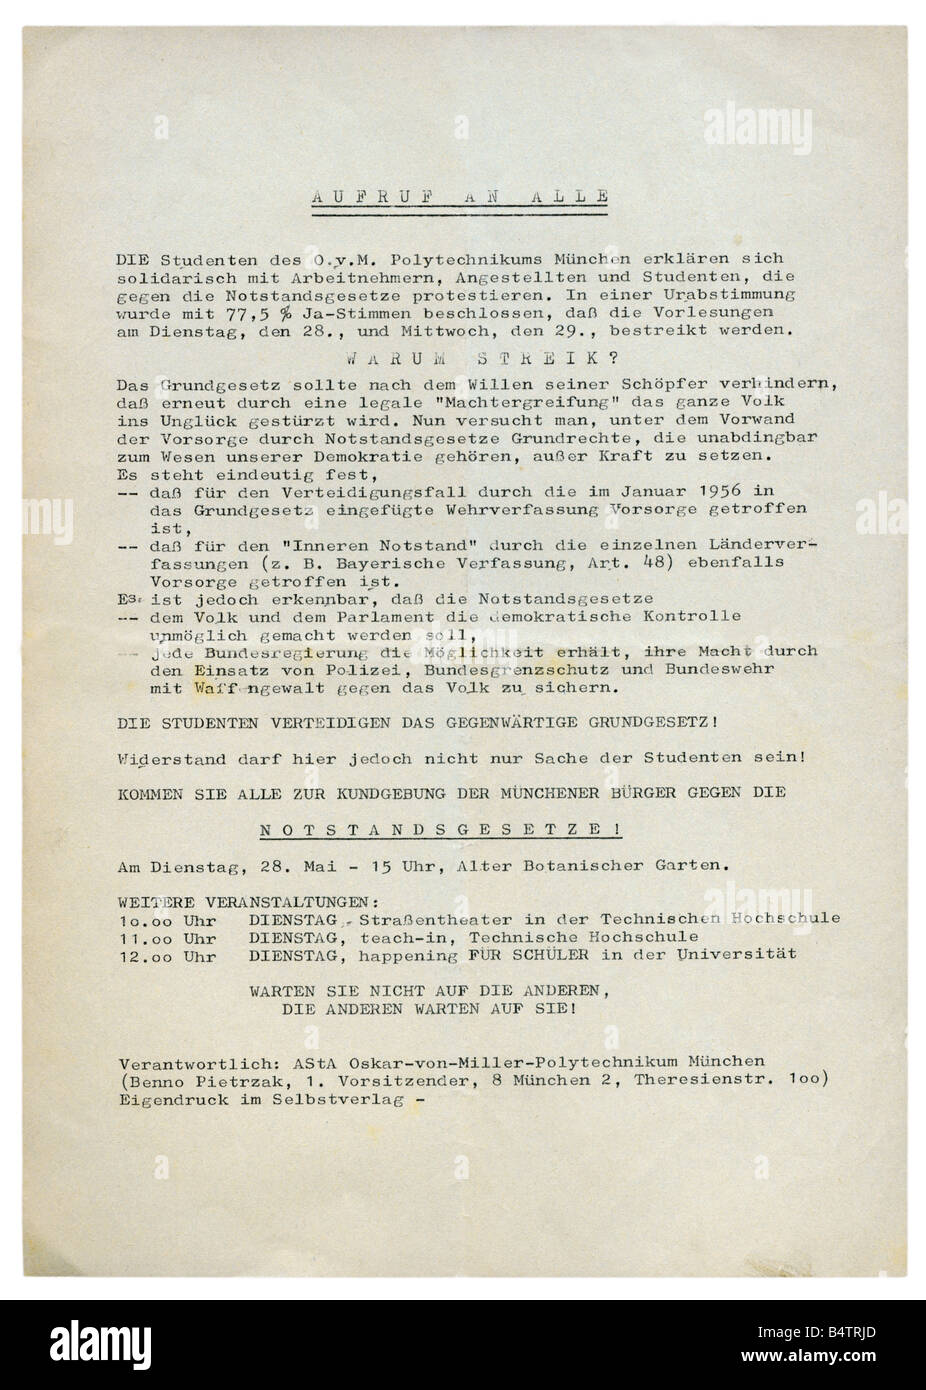 geography / travel, Germany, politics, student movement 1960s, flyer, call for strike against emergency acts, published by General Studying Committe Oskar - von - Miller - poltechnic school, Munich, 28.5.1968, , Stock Photo